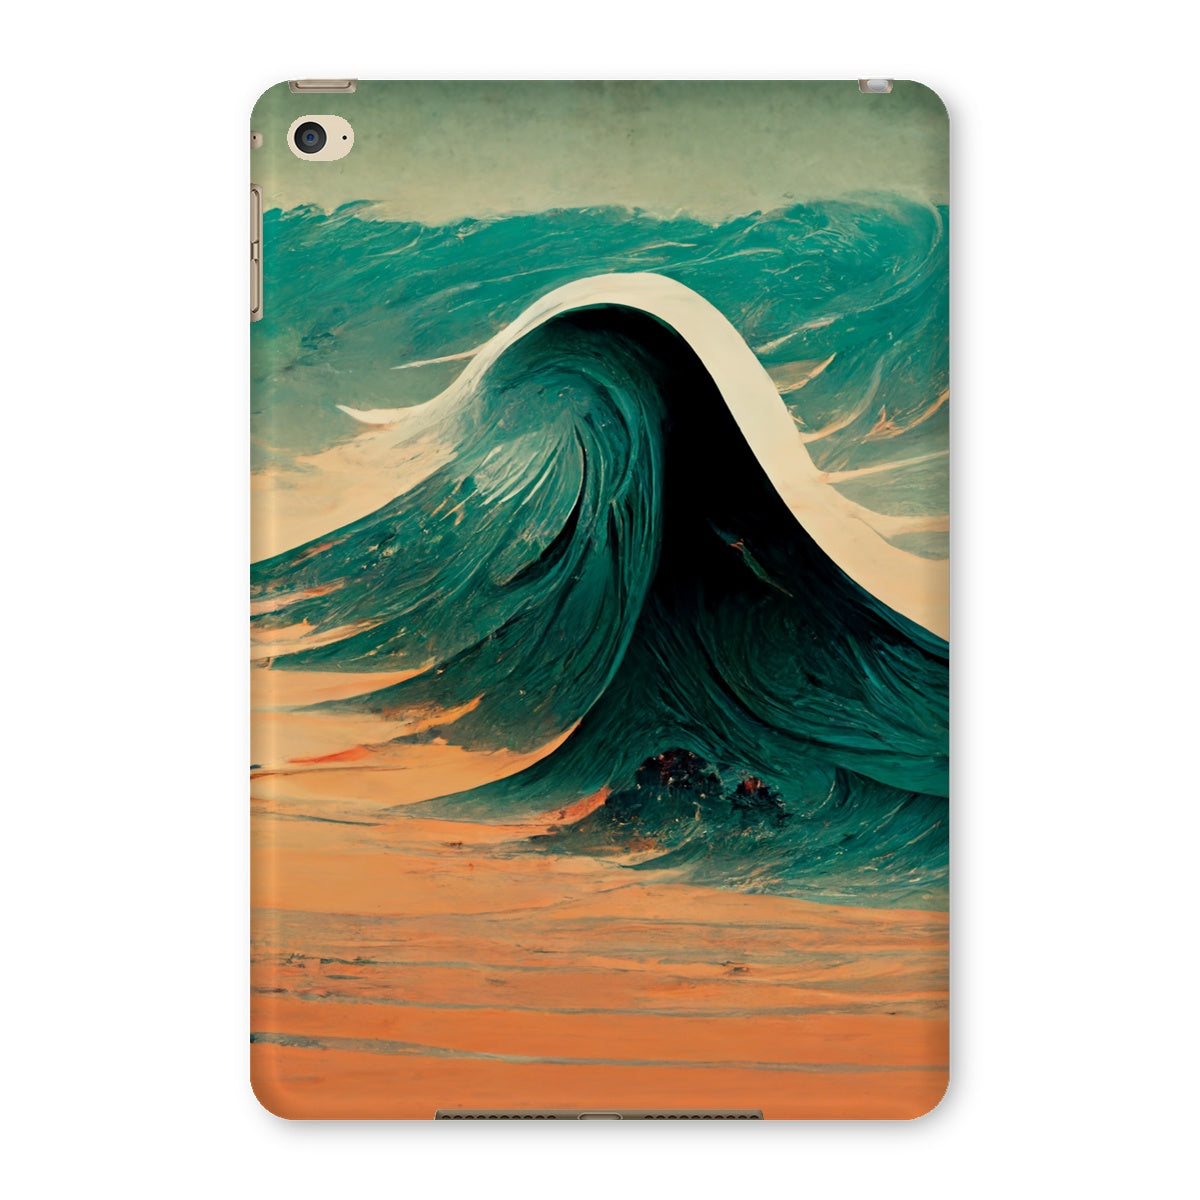 The Swell Tablet Cases